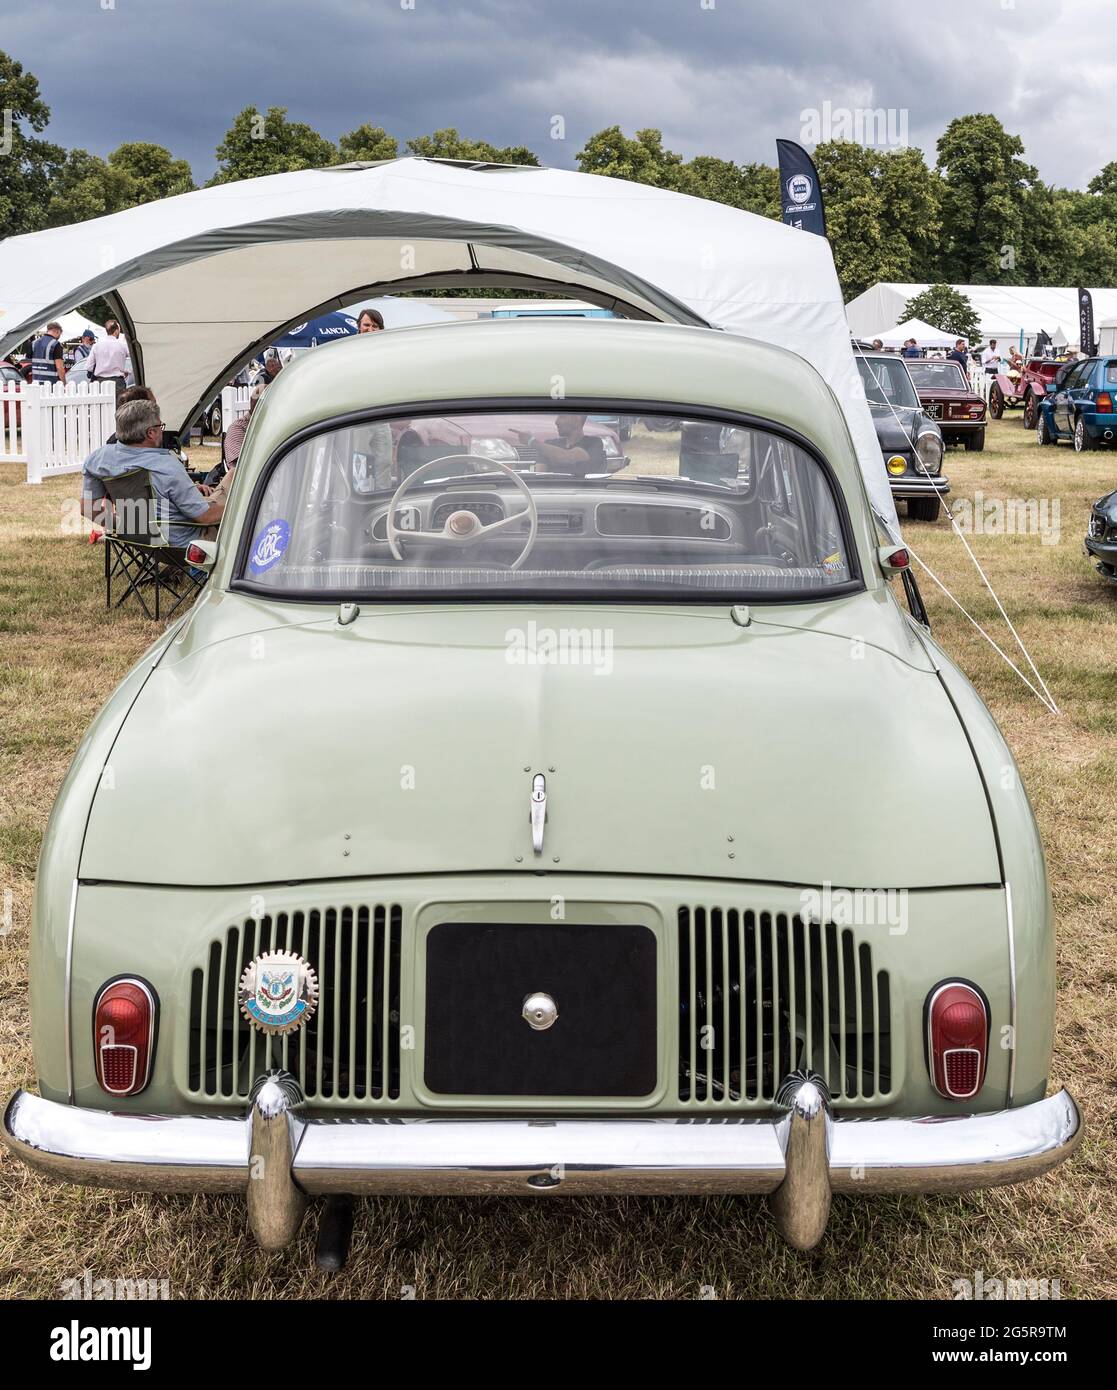 A 1958 Renault Dauphine At The Classic Car Show Syon Park 2021 London UK Stock Photo